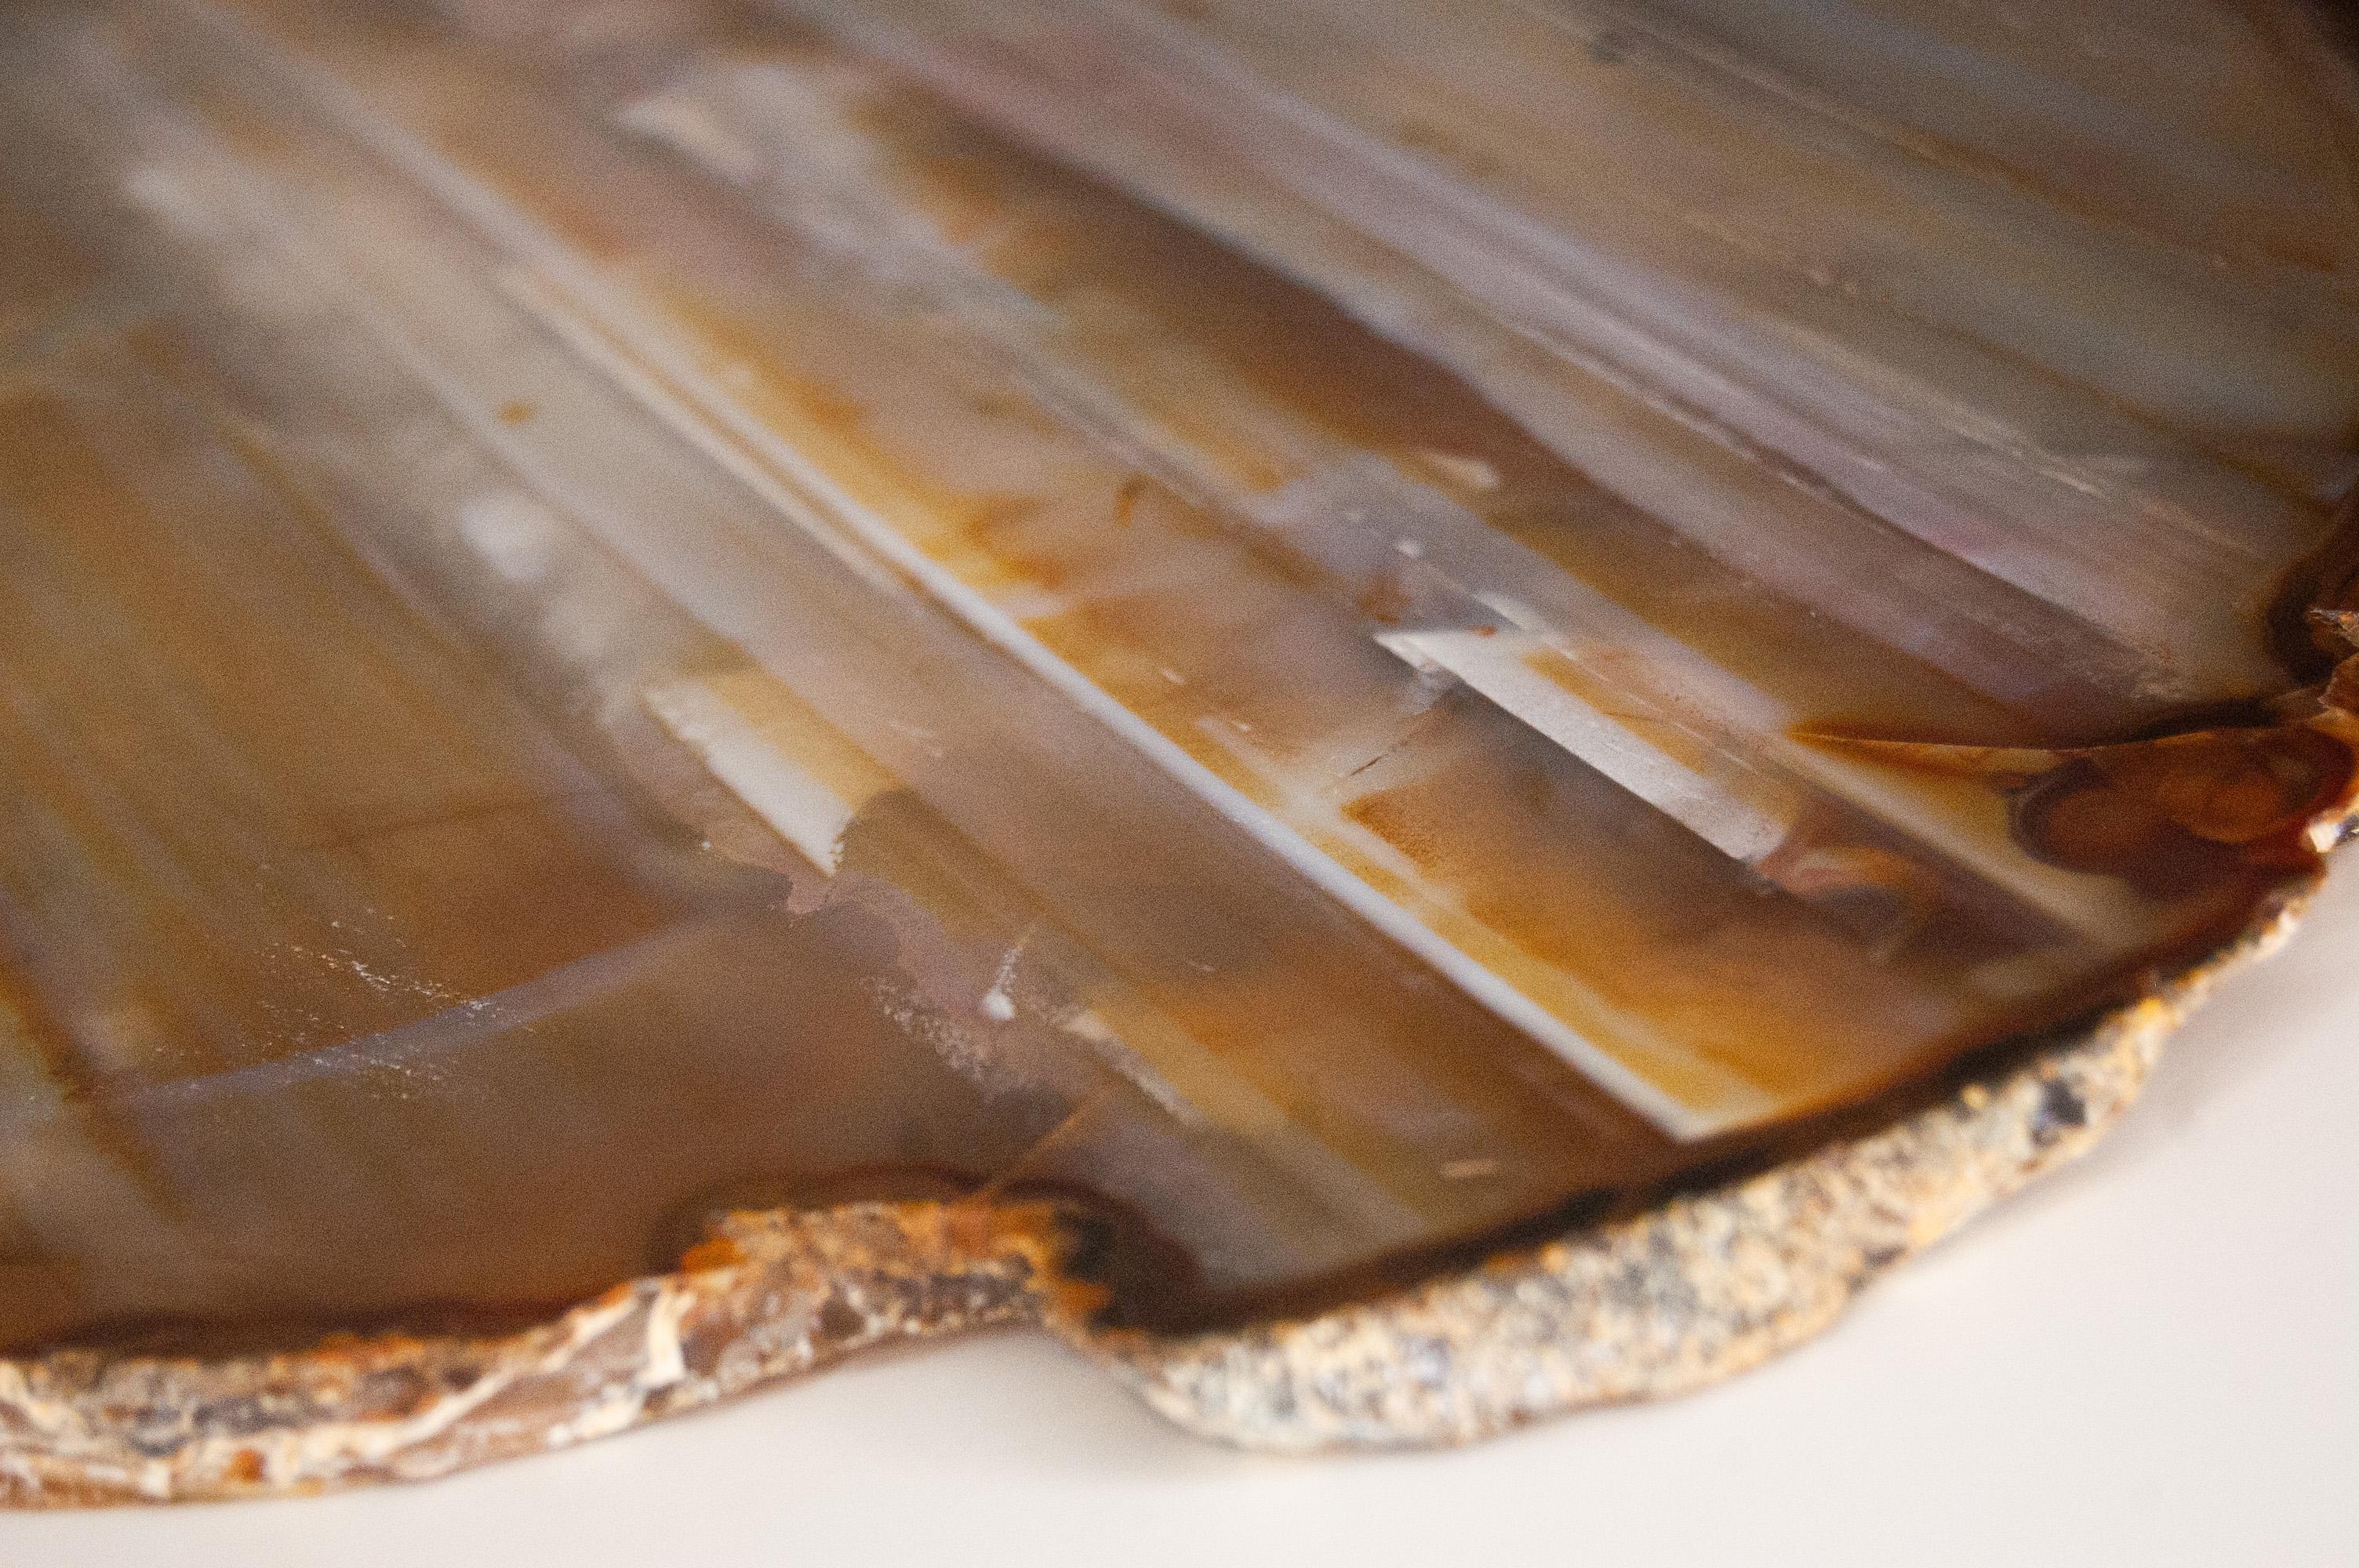 This one-of-a-kind natural agate serving tray is a luxury piece that brings the beauty of nature to any space. It stands out as a unique decorative piece and will impress guests at home as well as in a corporate event. Perfect gift for those who